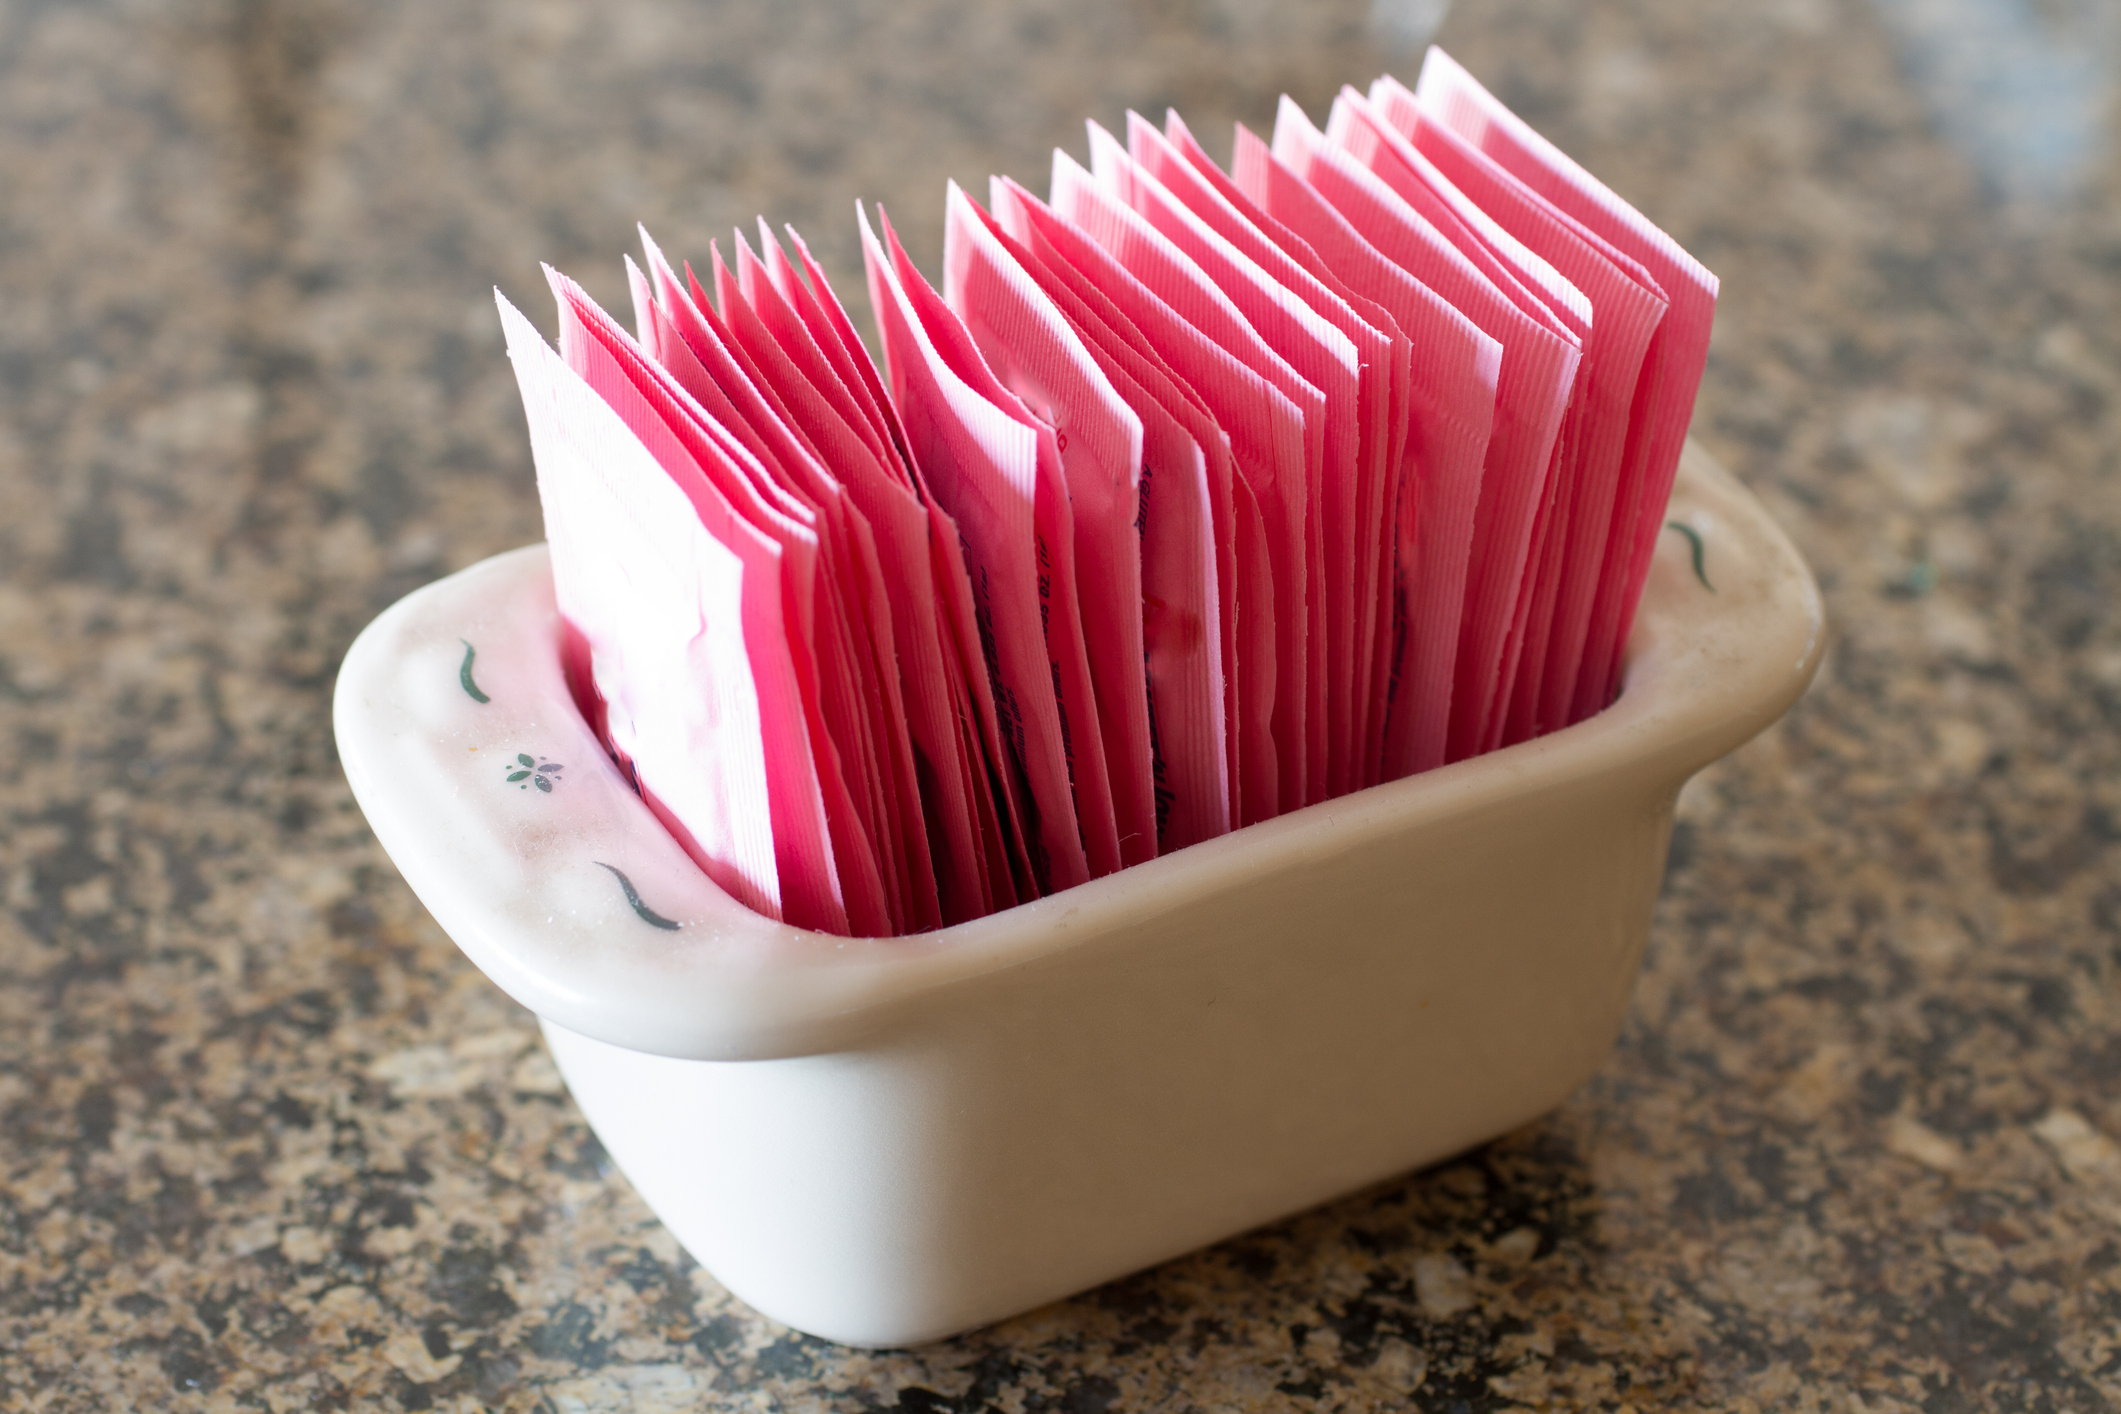 The link between artificial sweeteners, infection and multi-organ failure